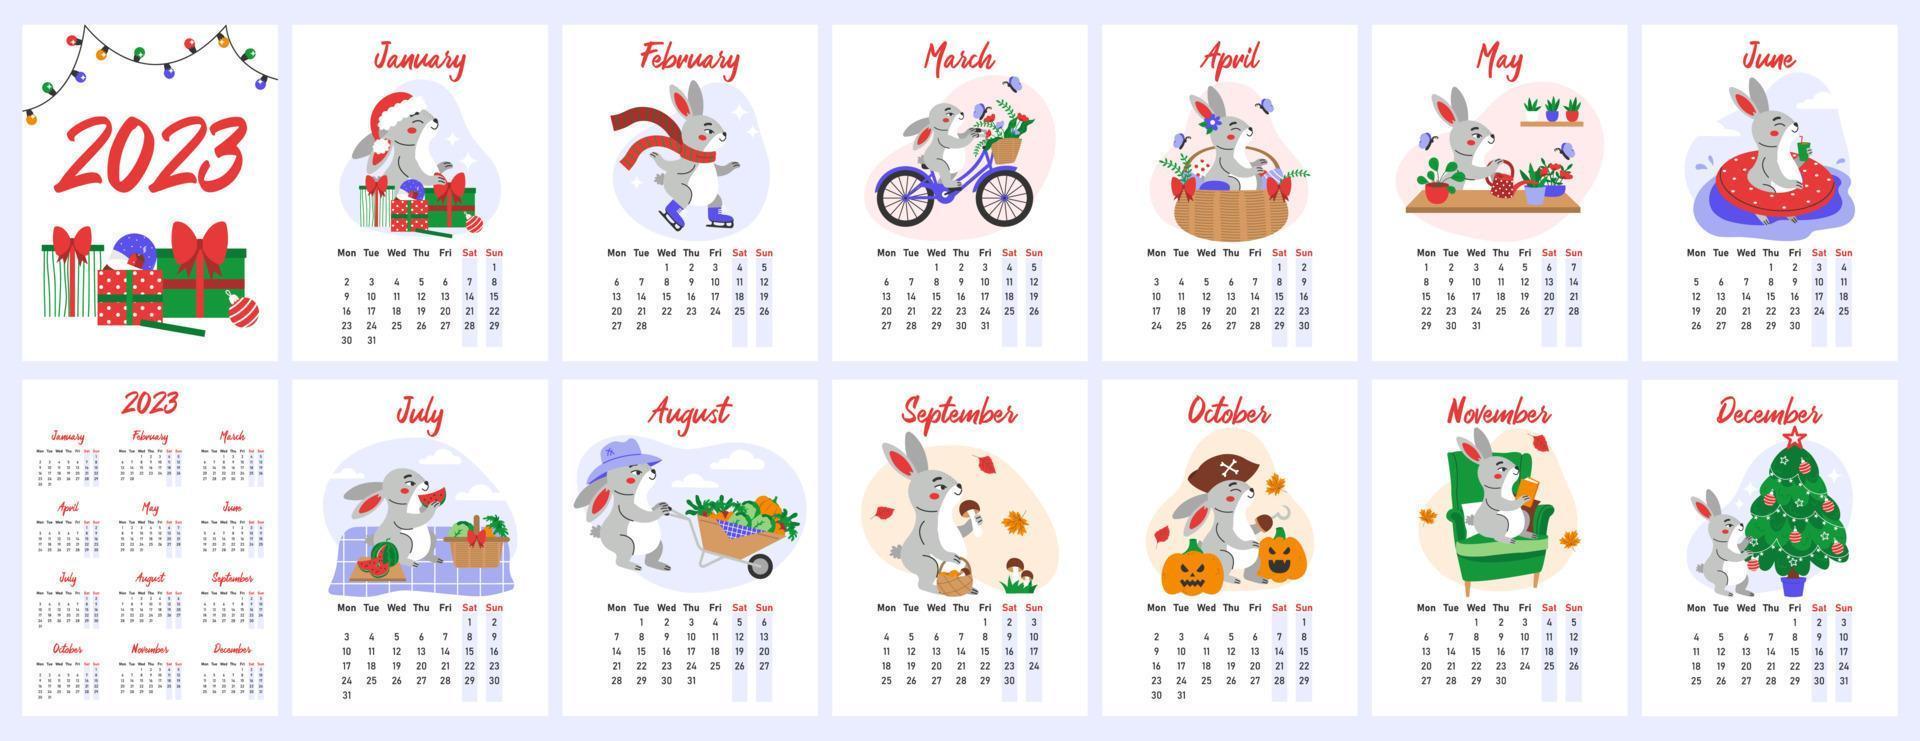 Vertical wall calendar for 2023 with symbol of the year - Rabbit in various scenes from life. Flat vector illustration.